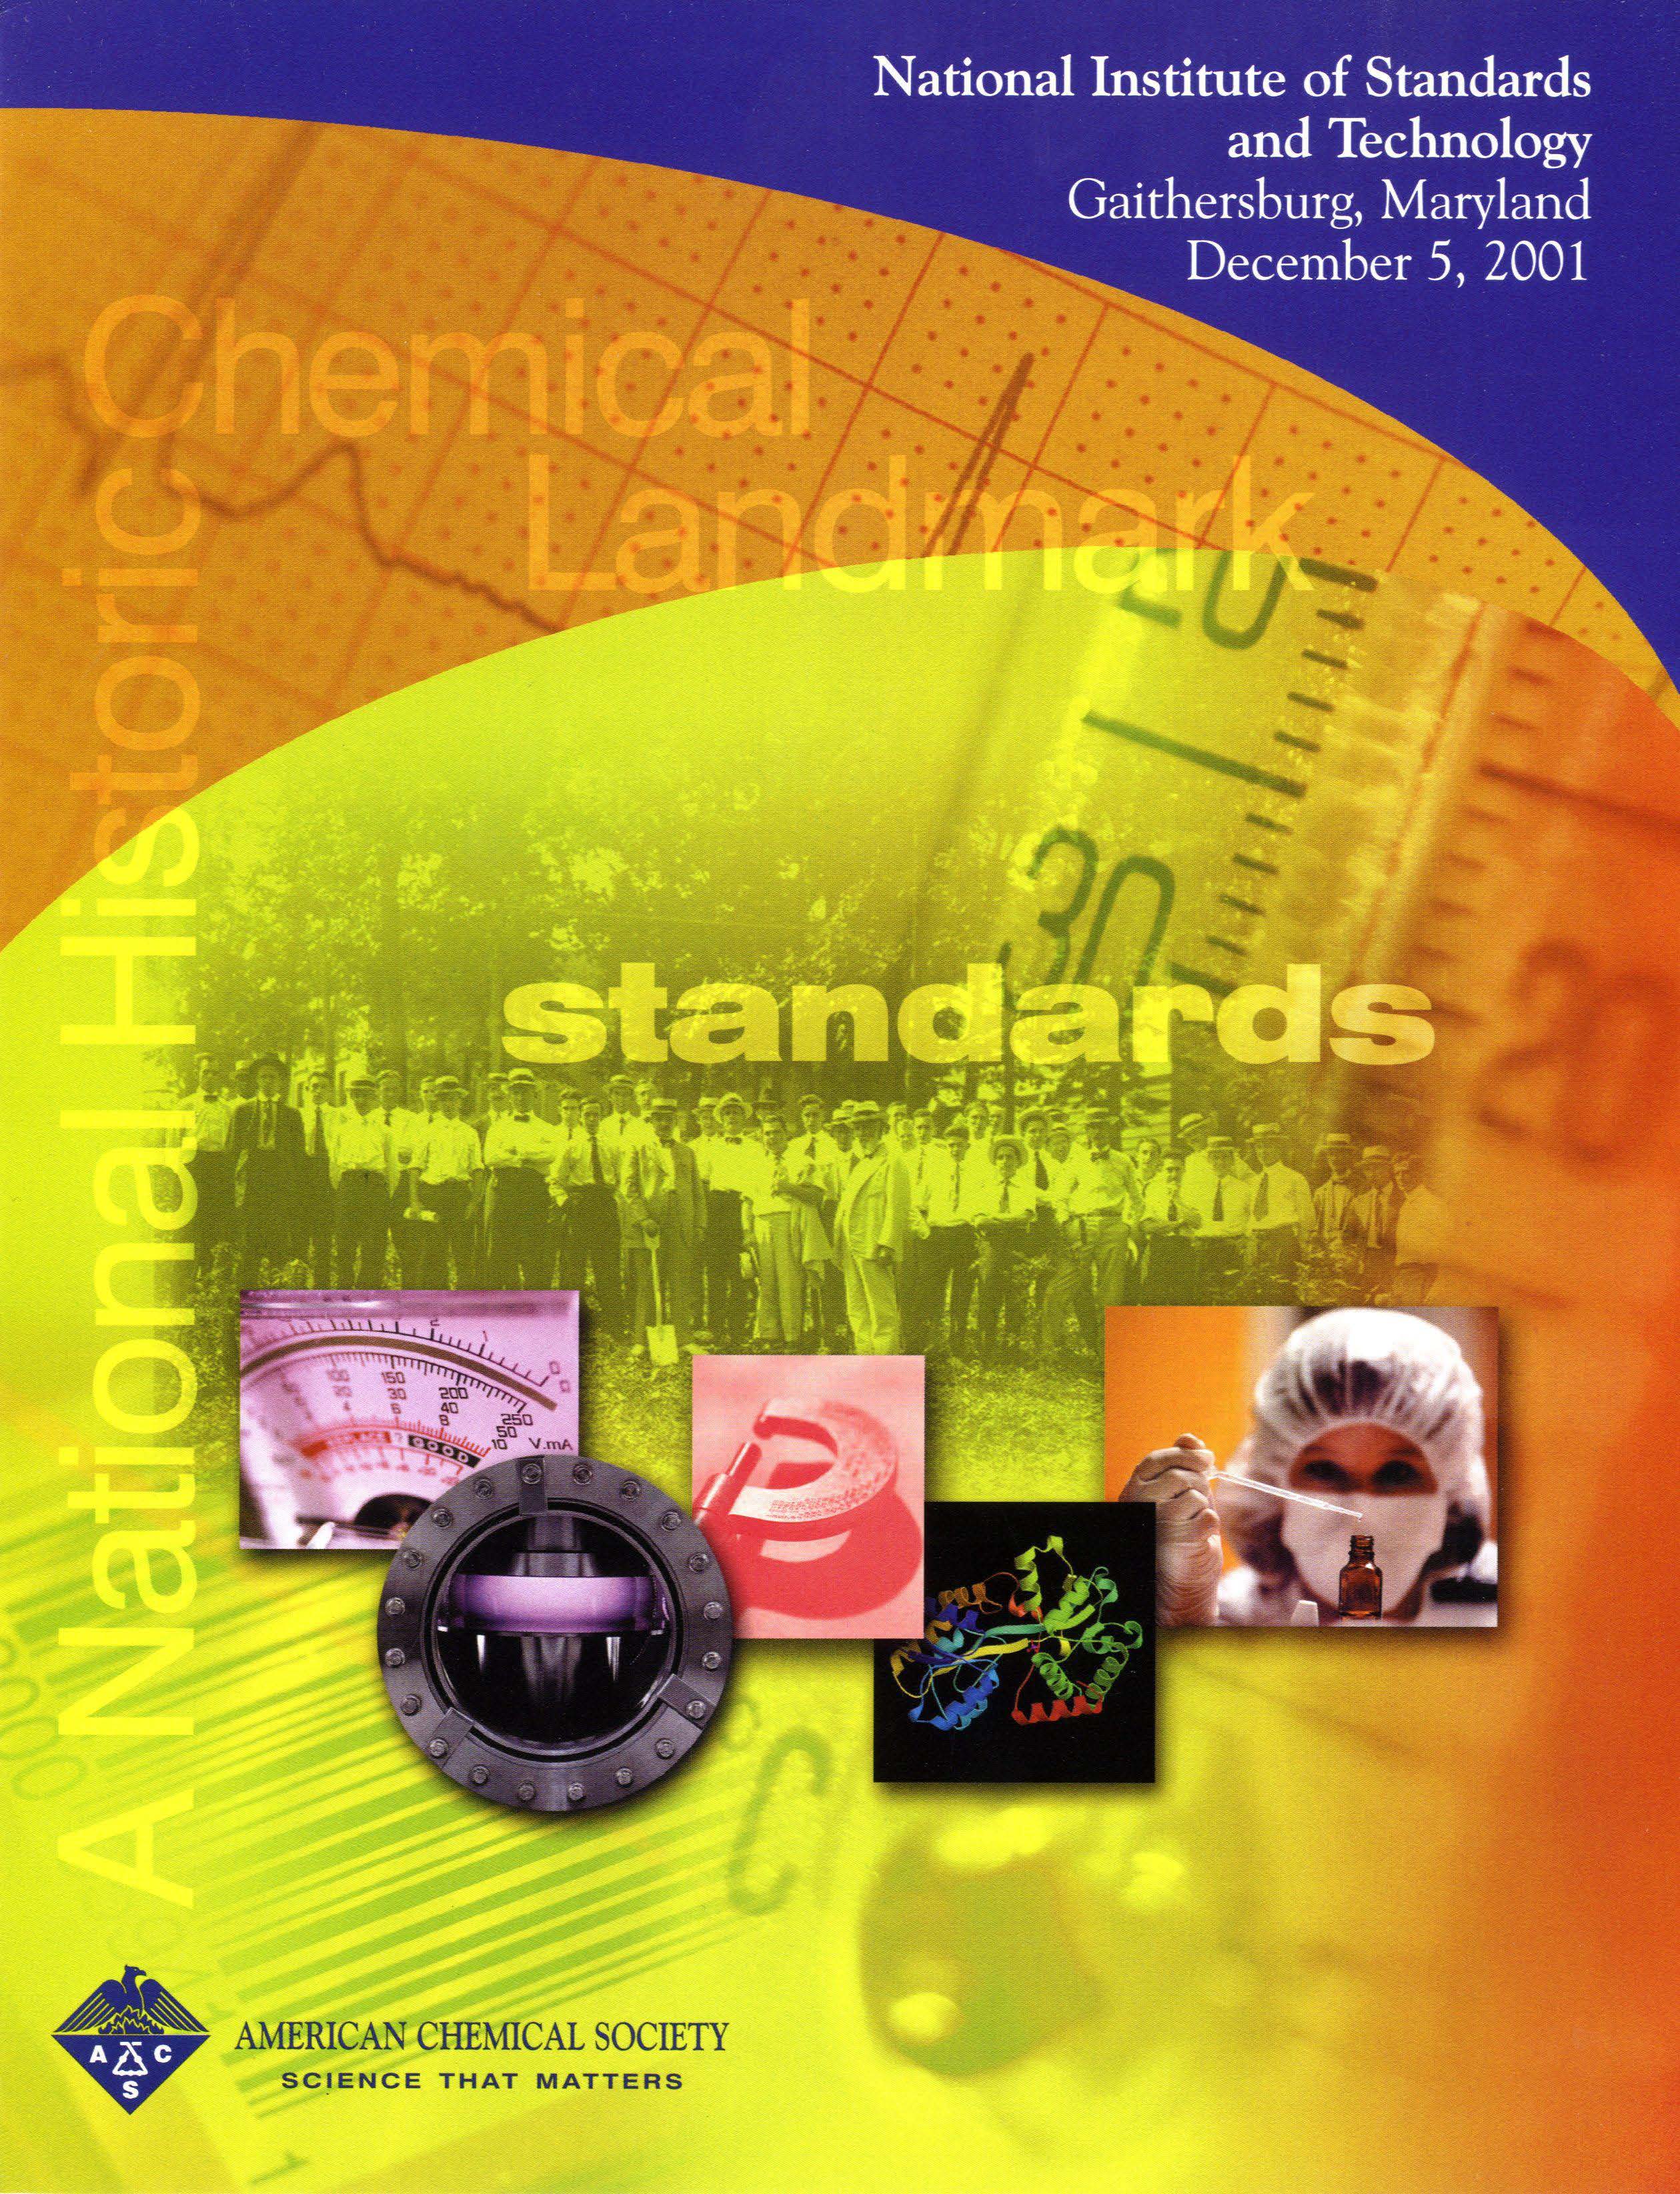 “National Institute of Standards and Technology” commemorative booklet